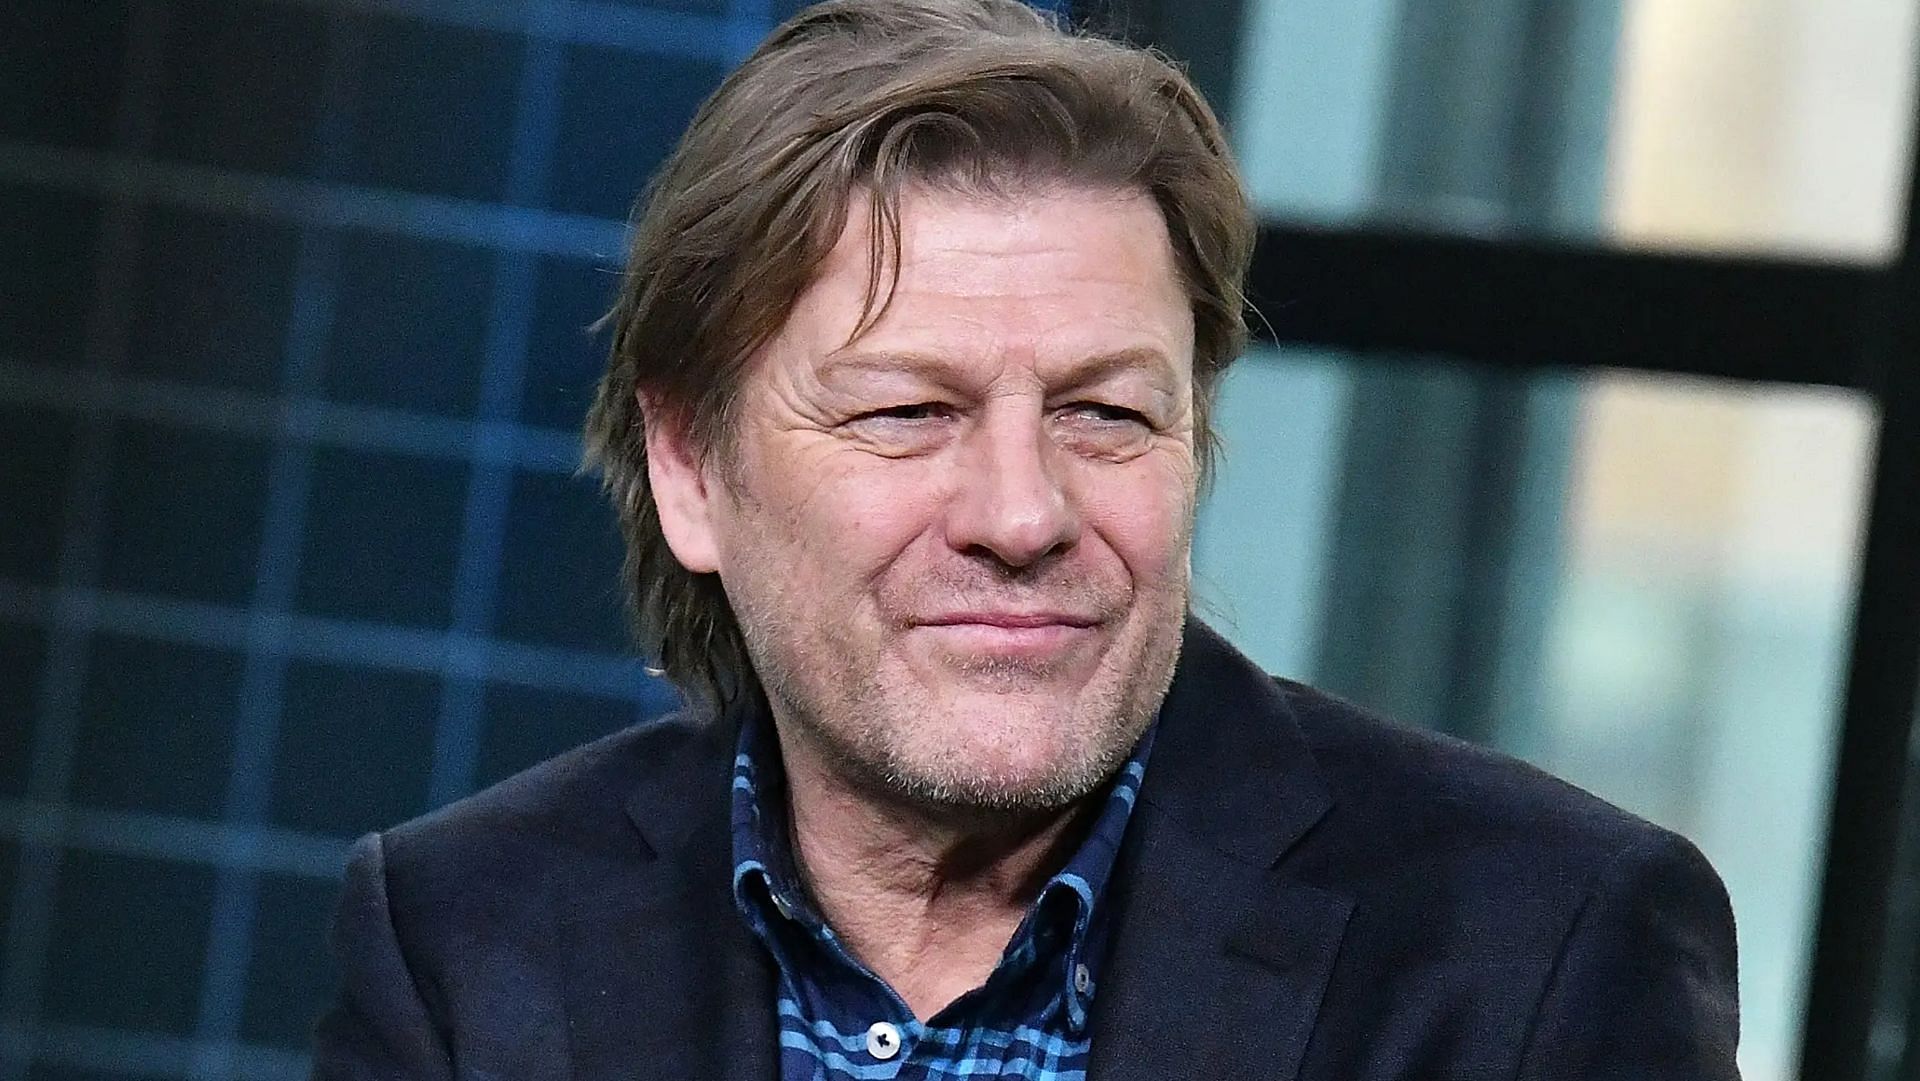 Sean Bean has been married five times up until now (Image via Getty Images)